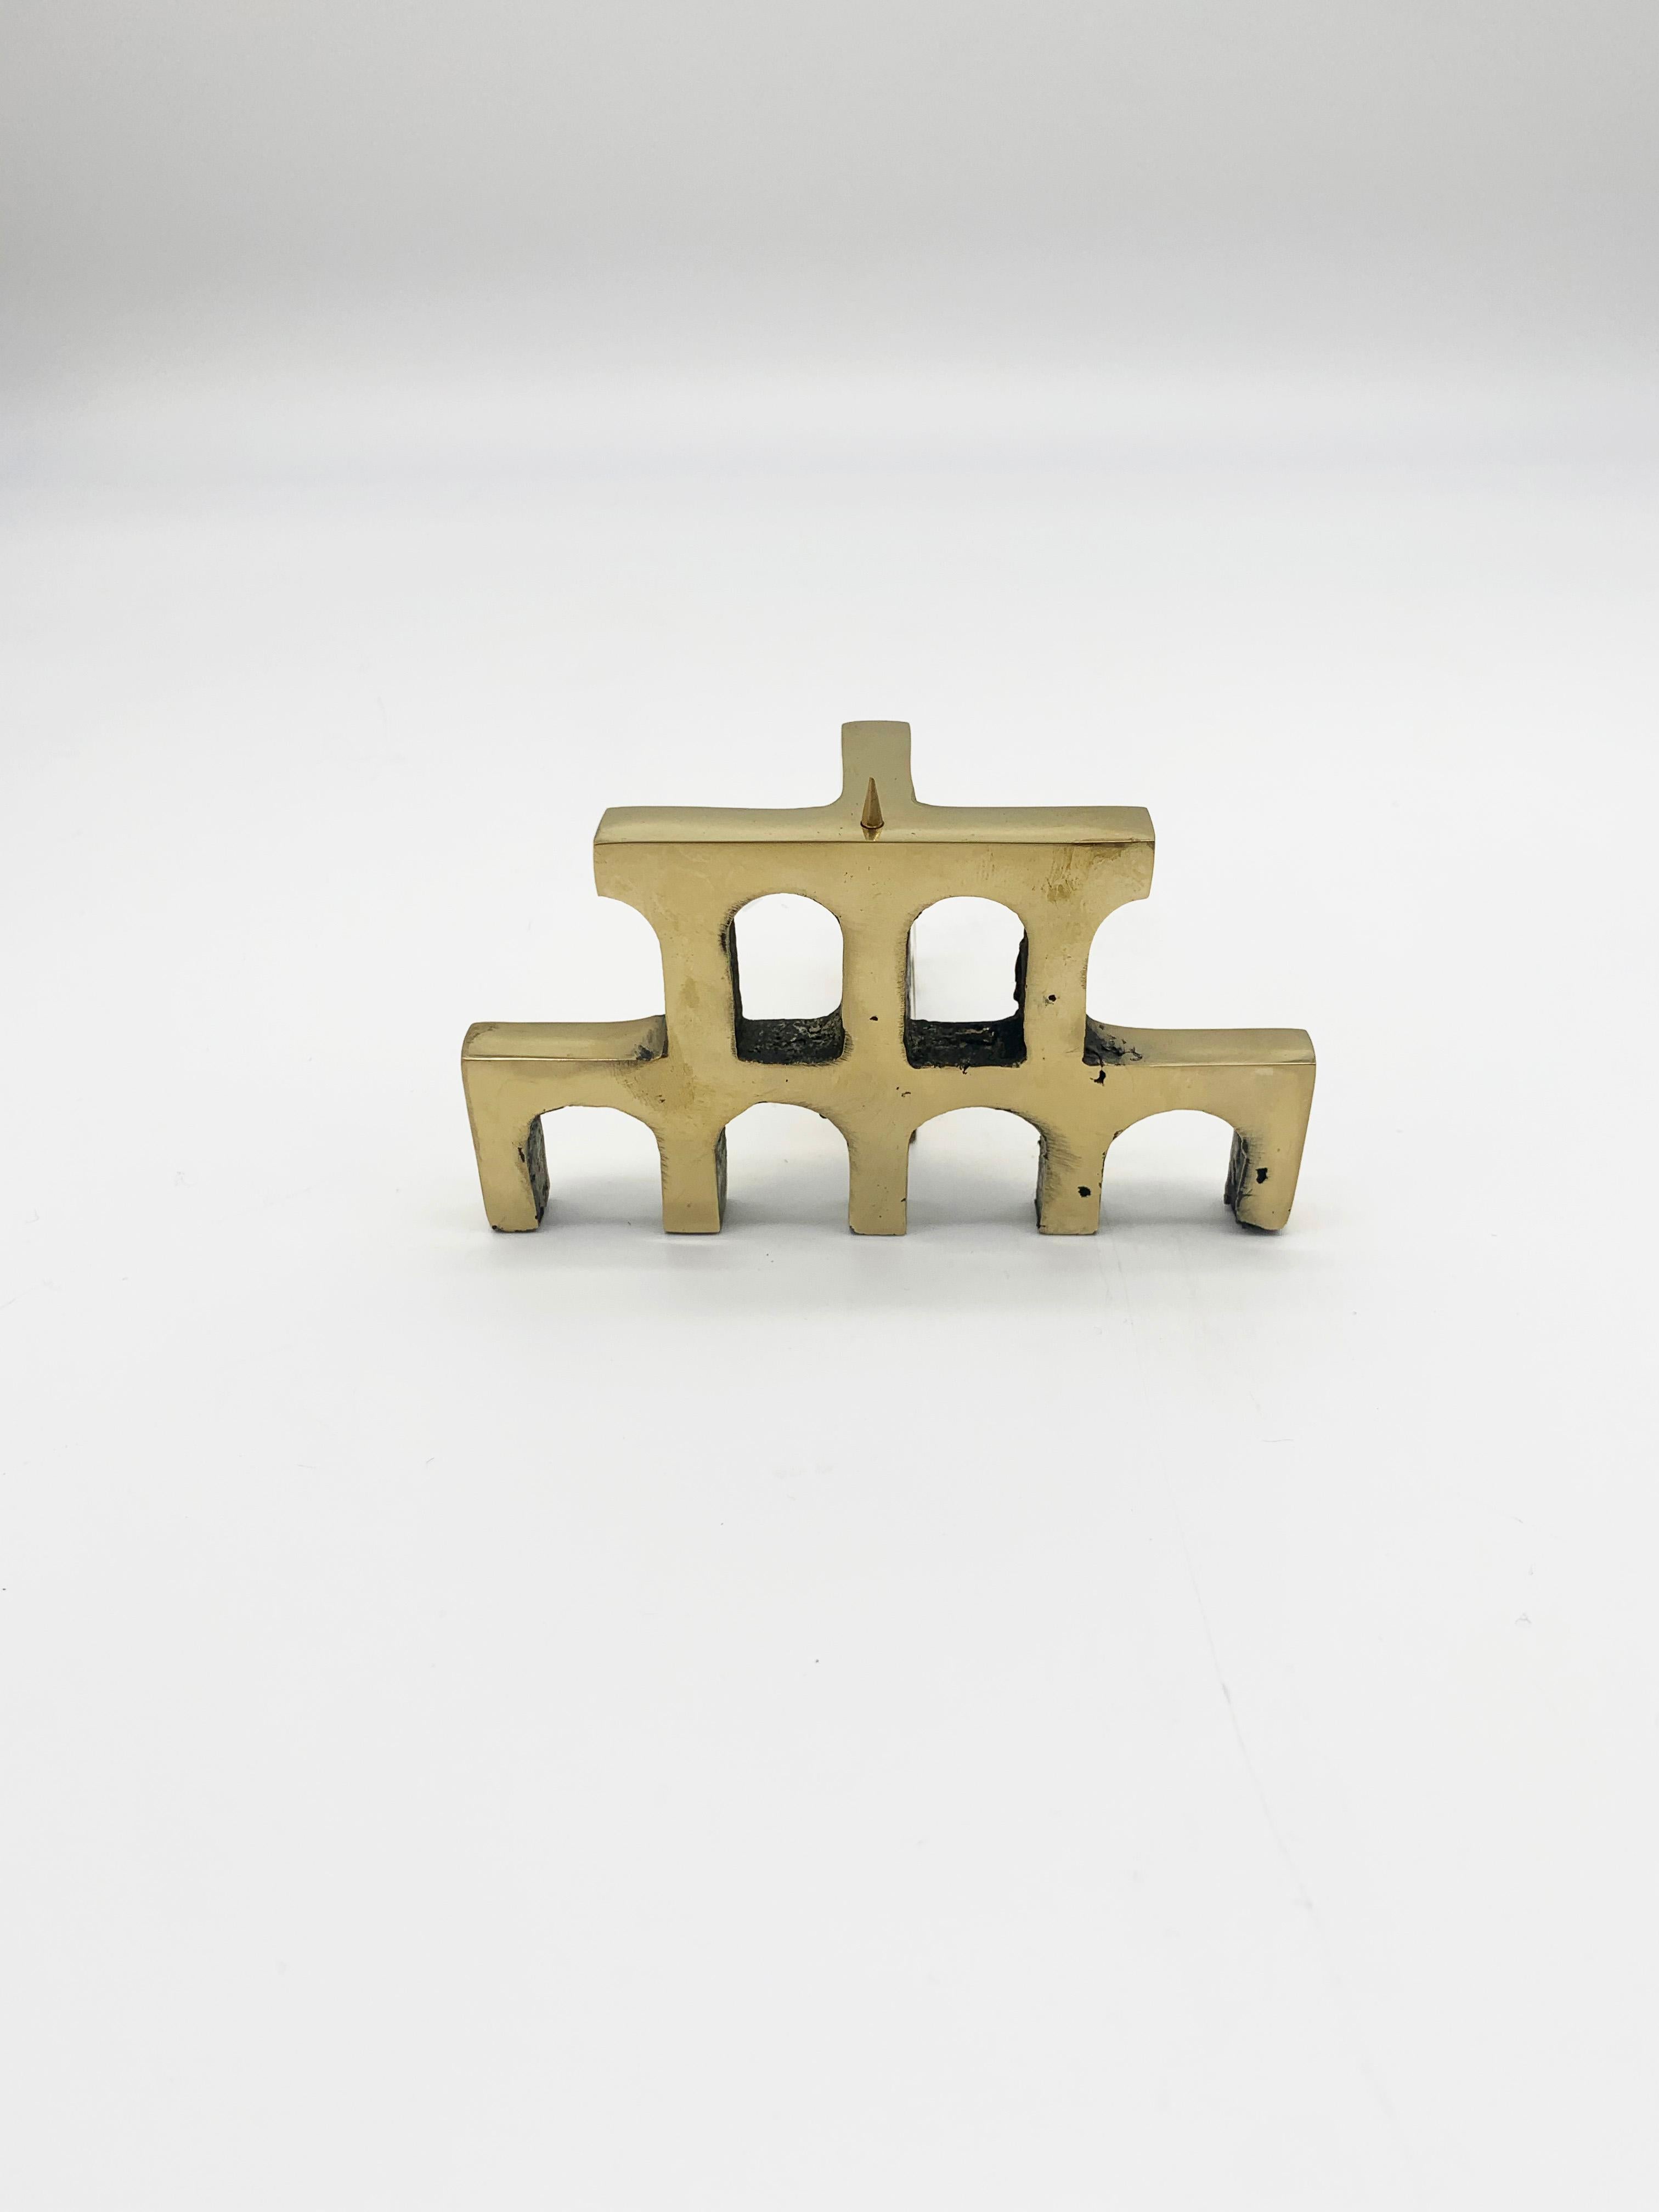 Arch candleholder II made in bronze by Fabien Barrero Carsenat 
Dimensions: 5.11